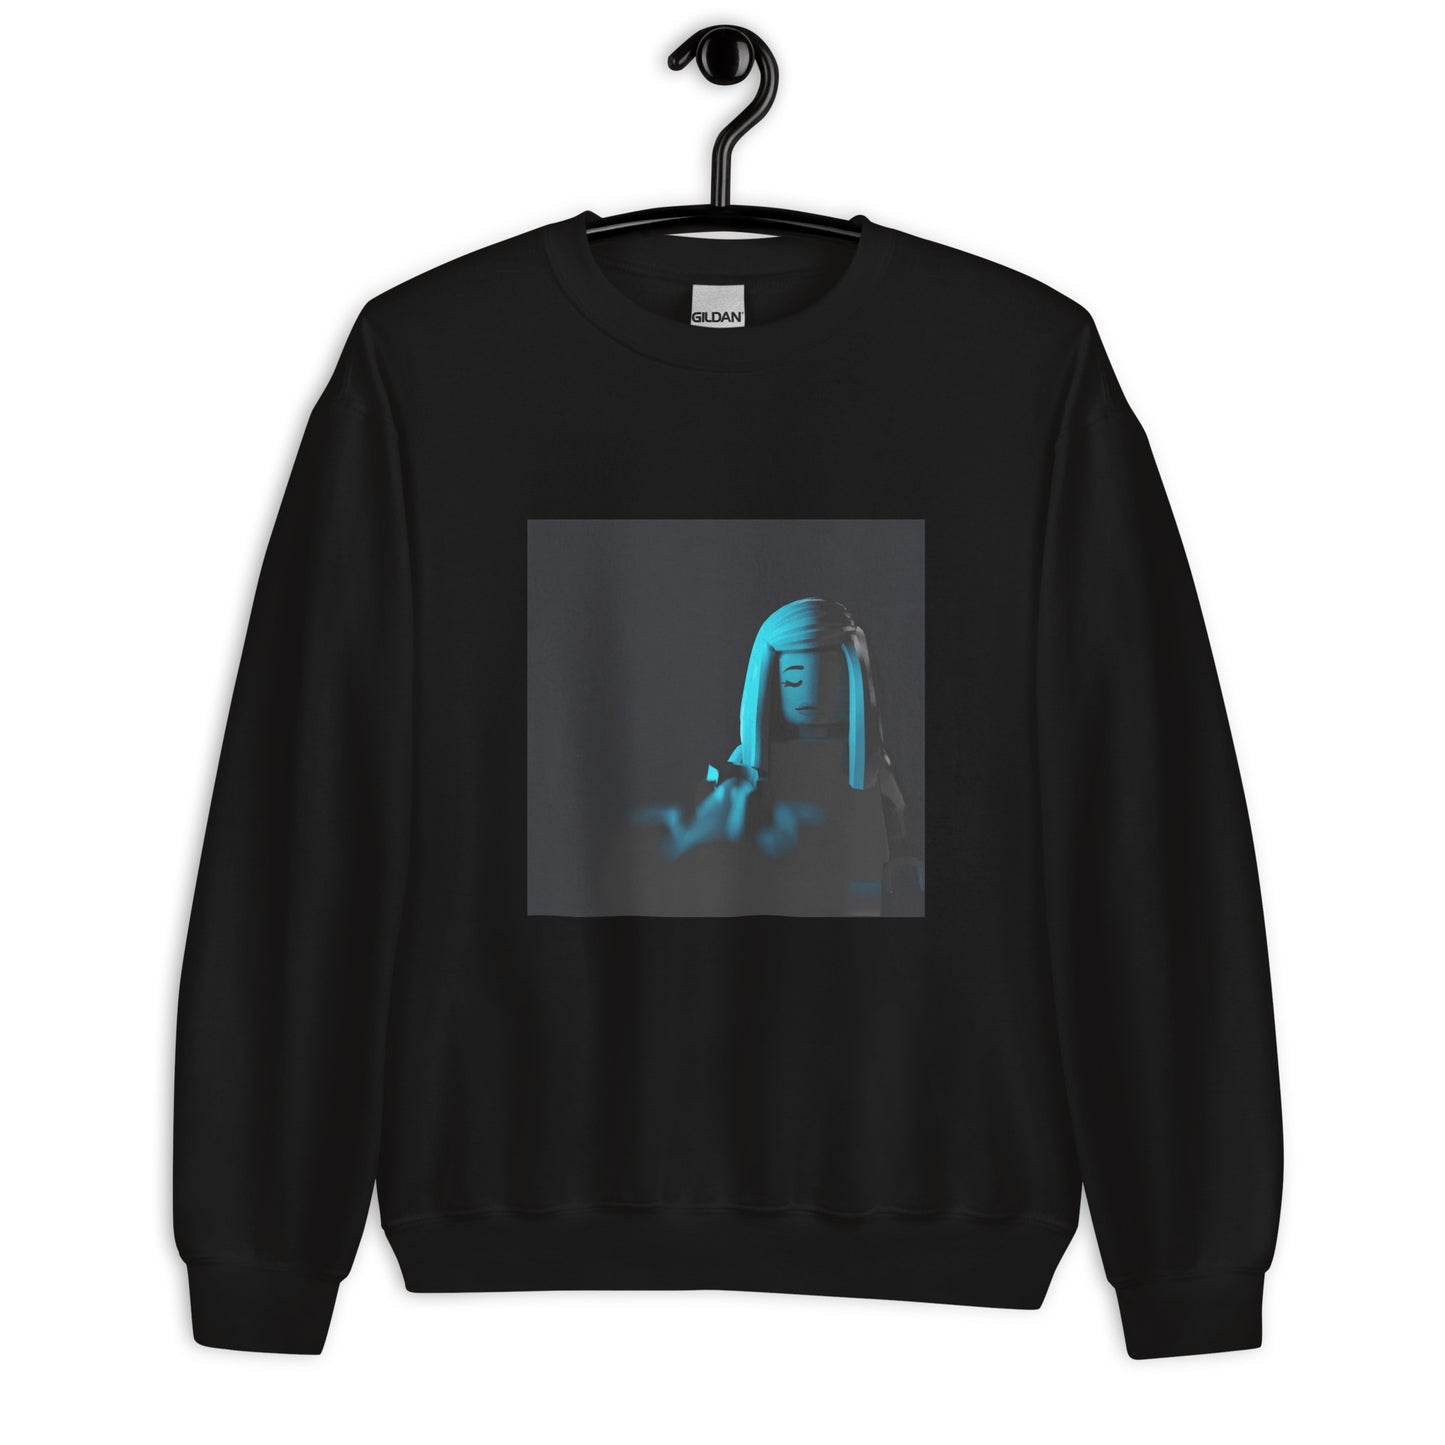 "TV Girl - The Night in Question: French Exit Outtakes" Lego Parody Sweatshirt